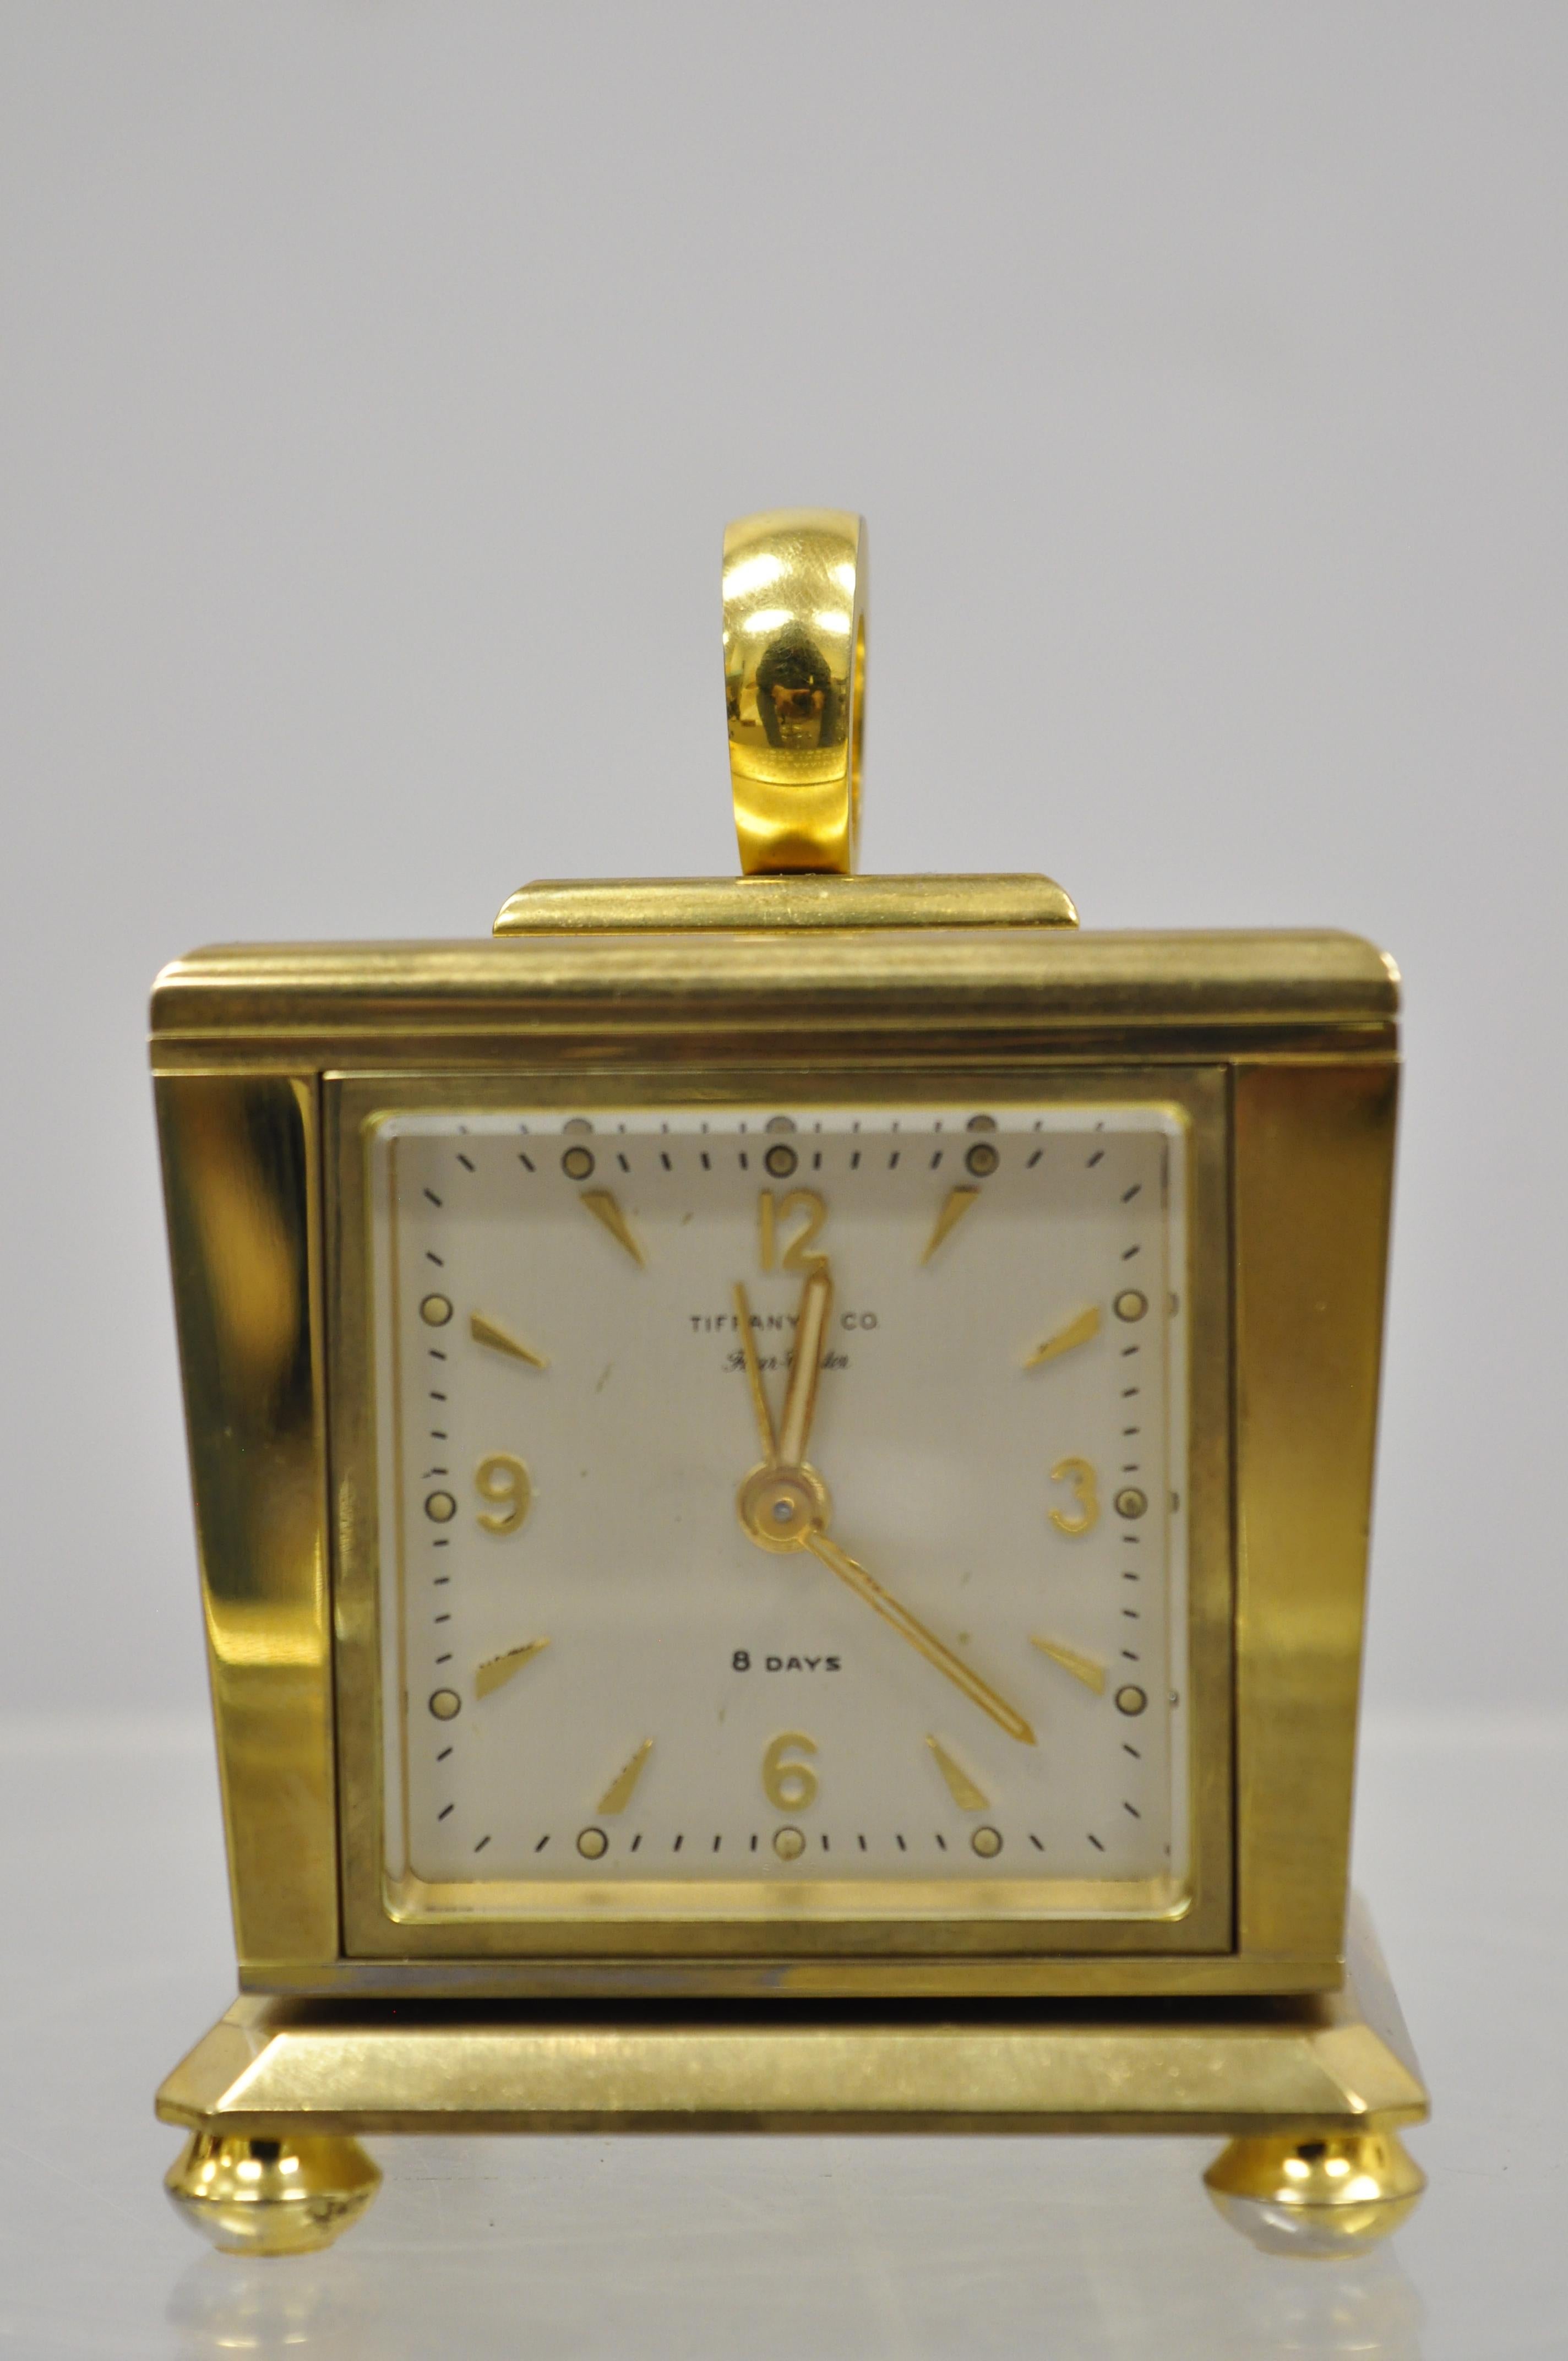 Tiffany & Co. eight day brass four caster revolving small desk clock. Item includes a solid brass revolving case, Swiss made, alarm clock, barometer/thermometer, hygrometer. Engraved to top of case, circa mid-20th century. Measurements: 4.5